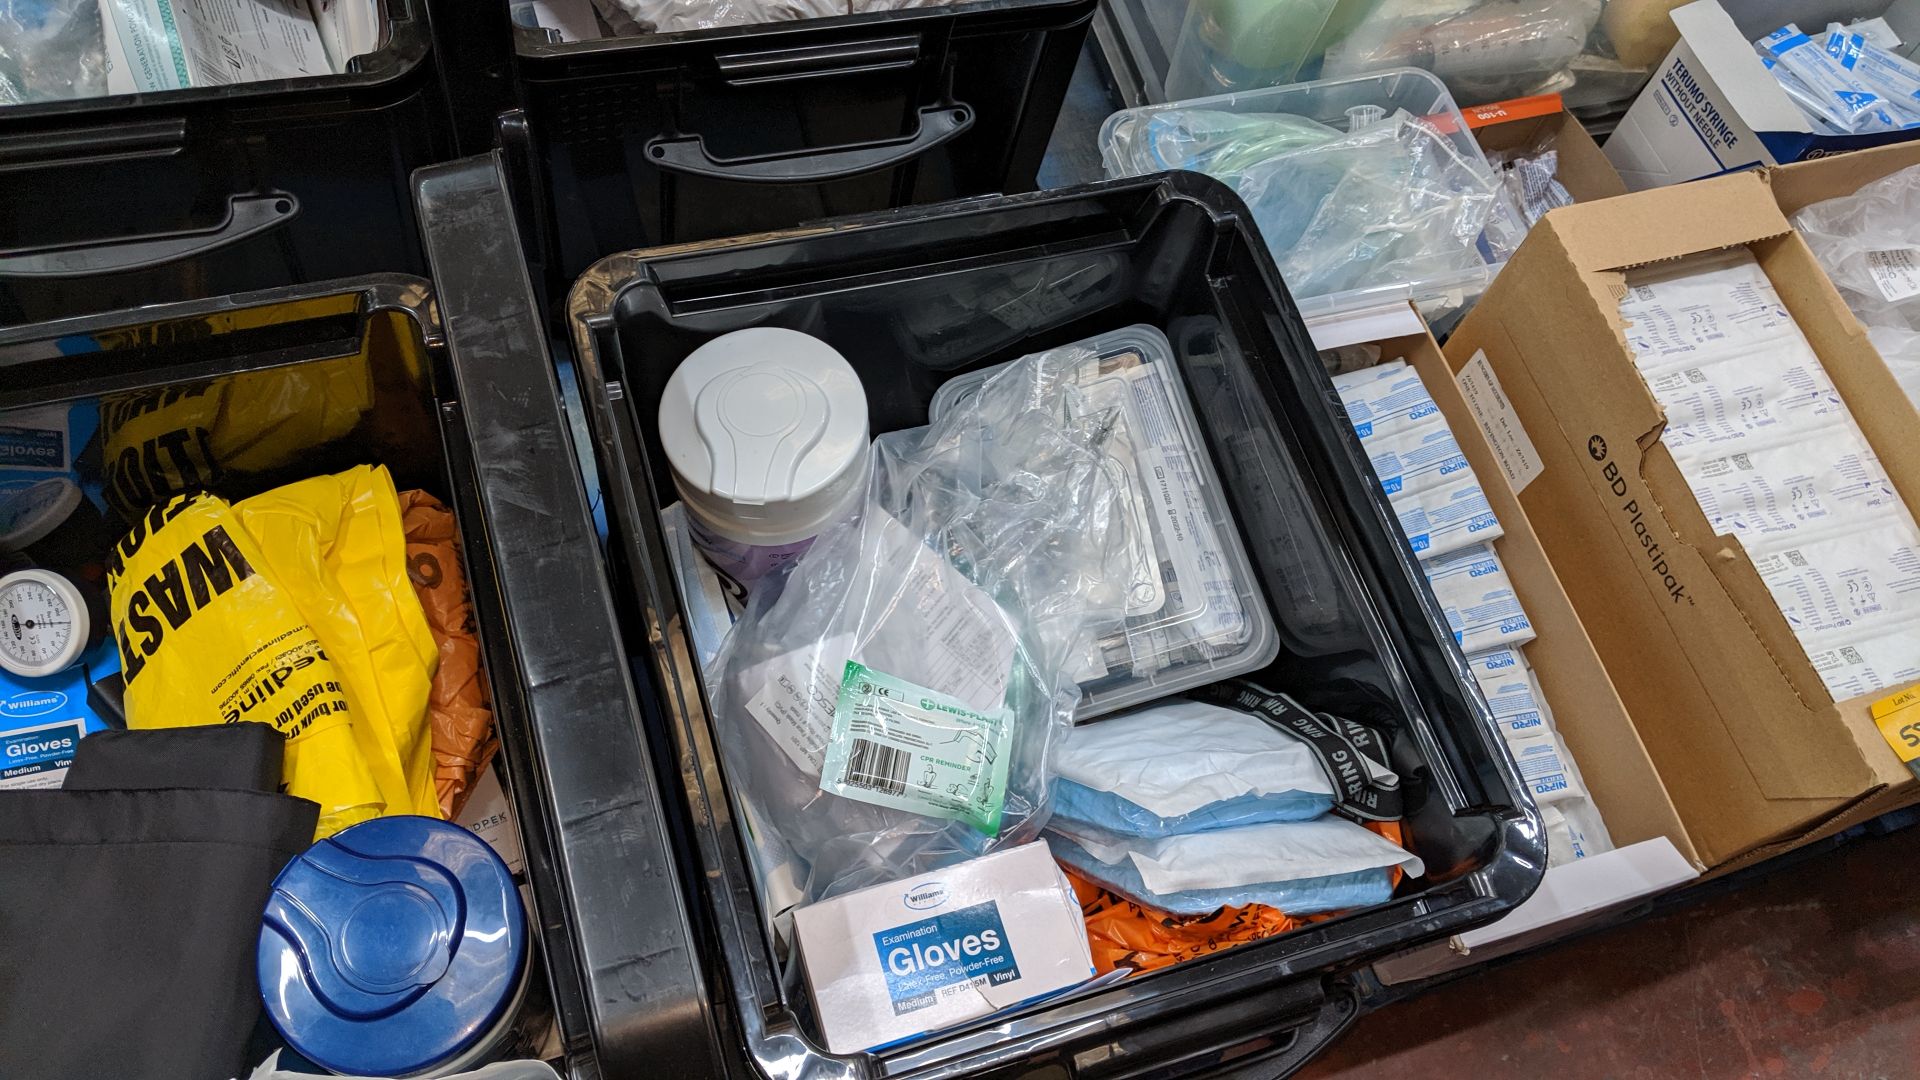 Contents of 6 crates of assorted medical supplies including blood pressure monitoring equipment, - Image 7 of 8